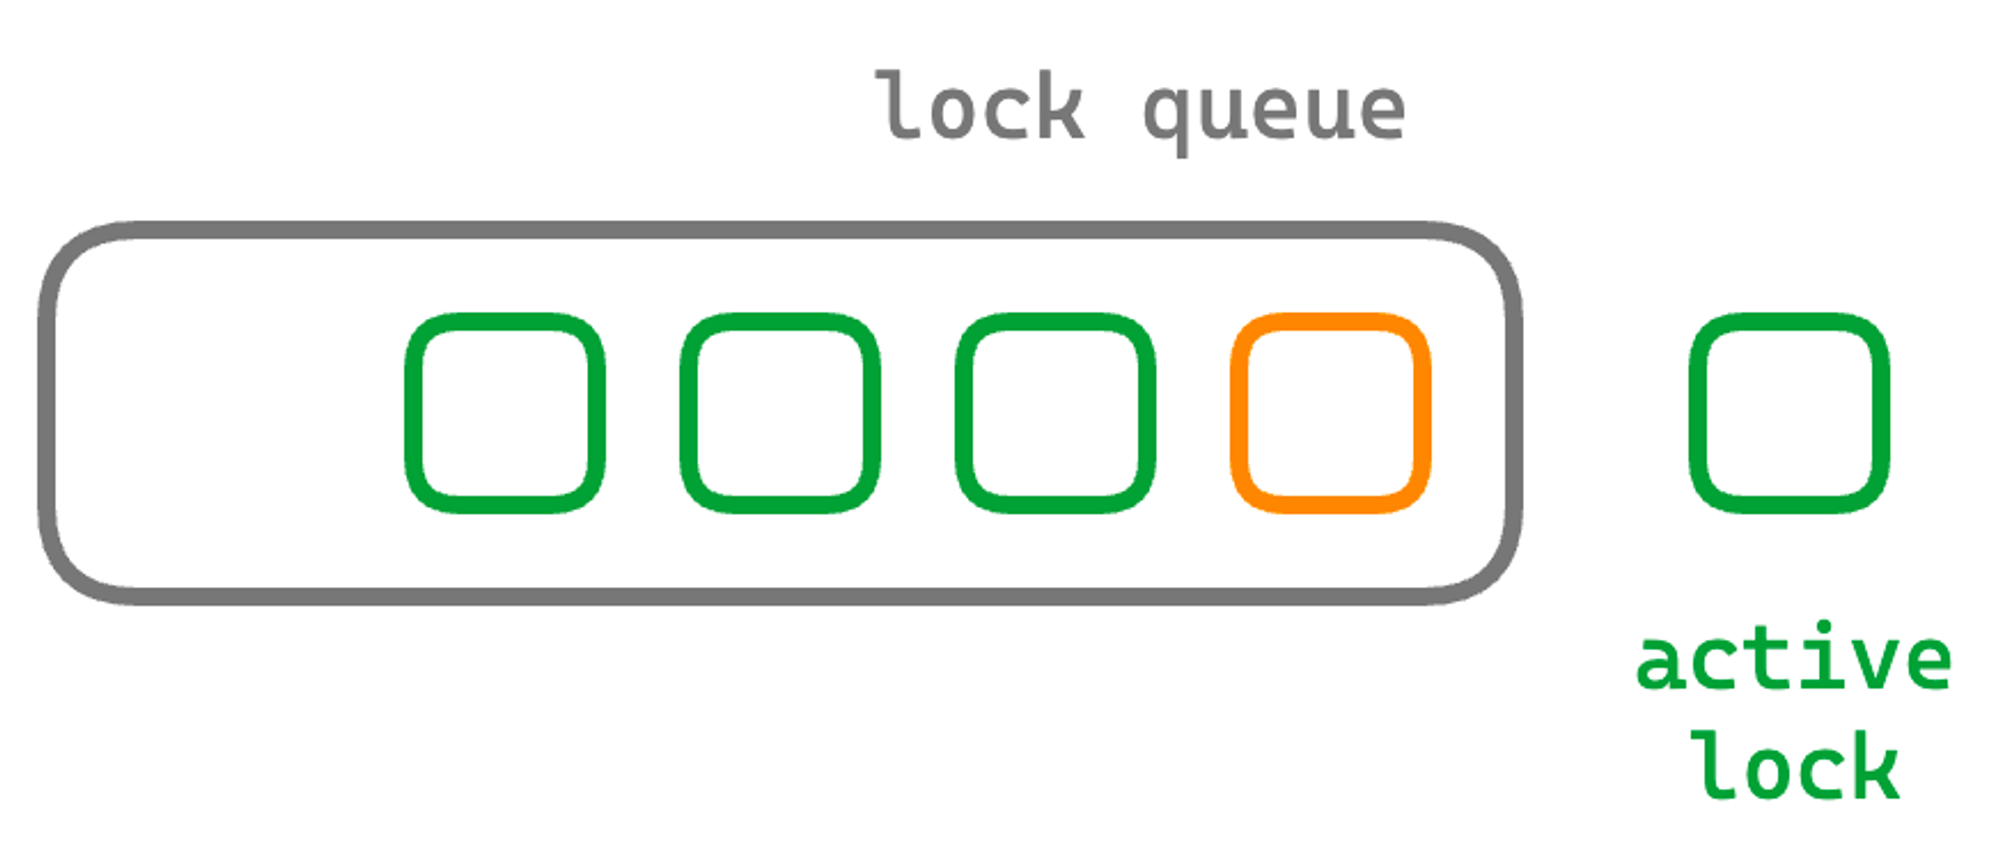 Statements waiting in a lock queue